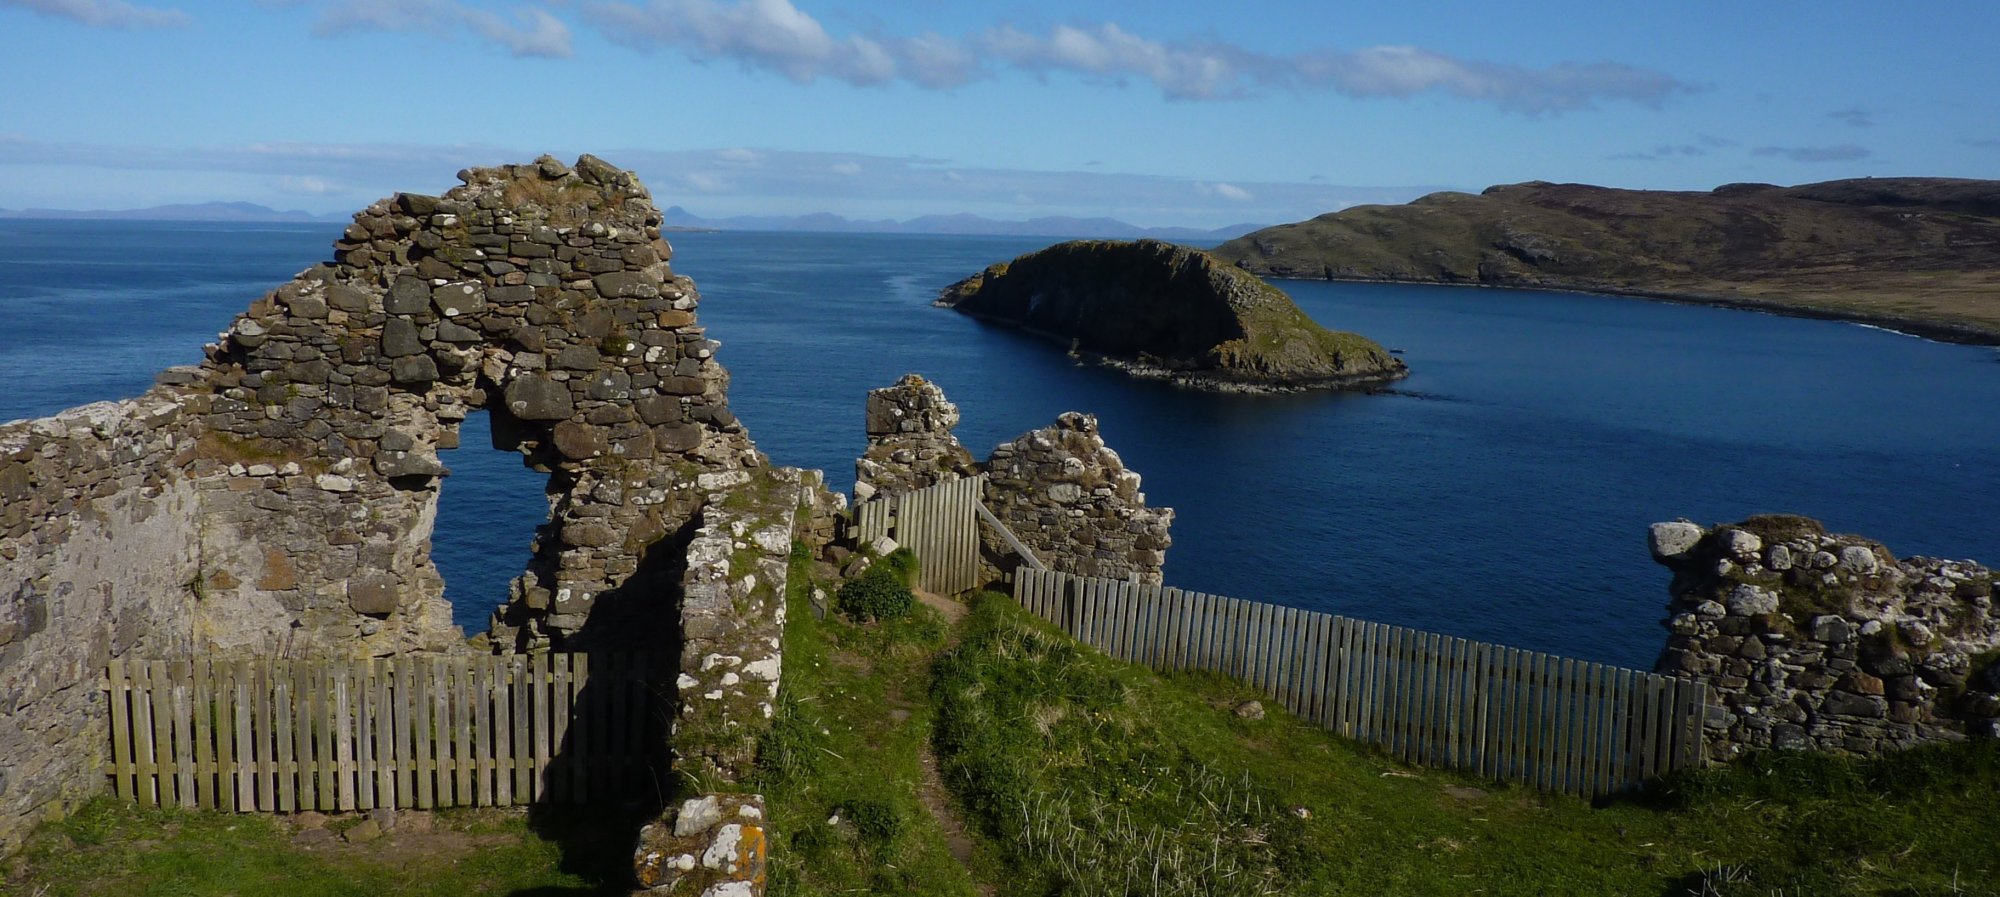 Looking across the broken remains of Duntulm Castle towards Harris and Lewis